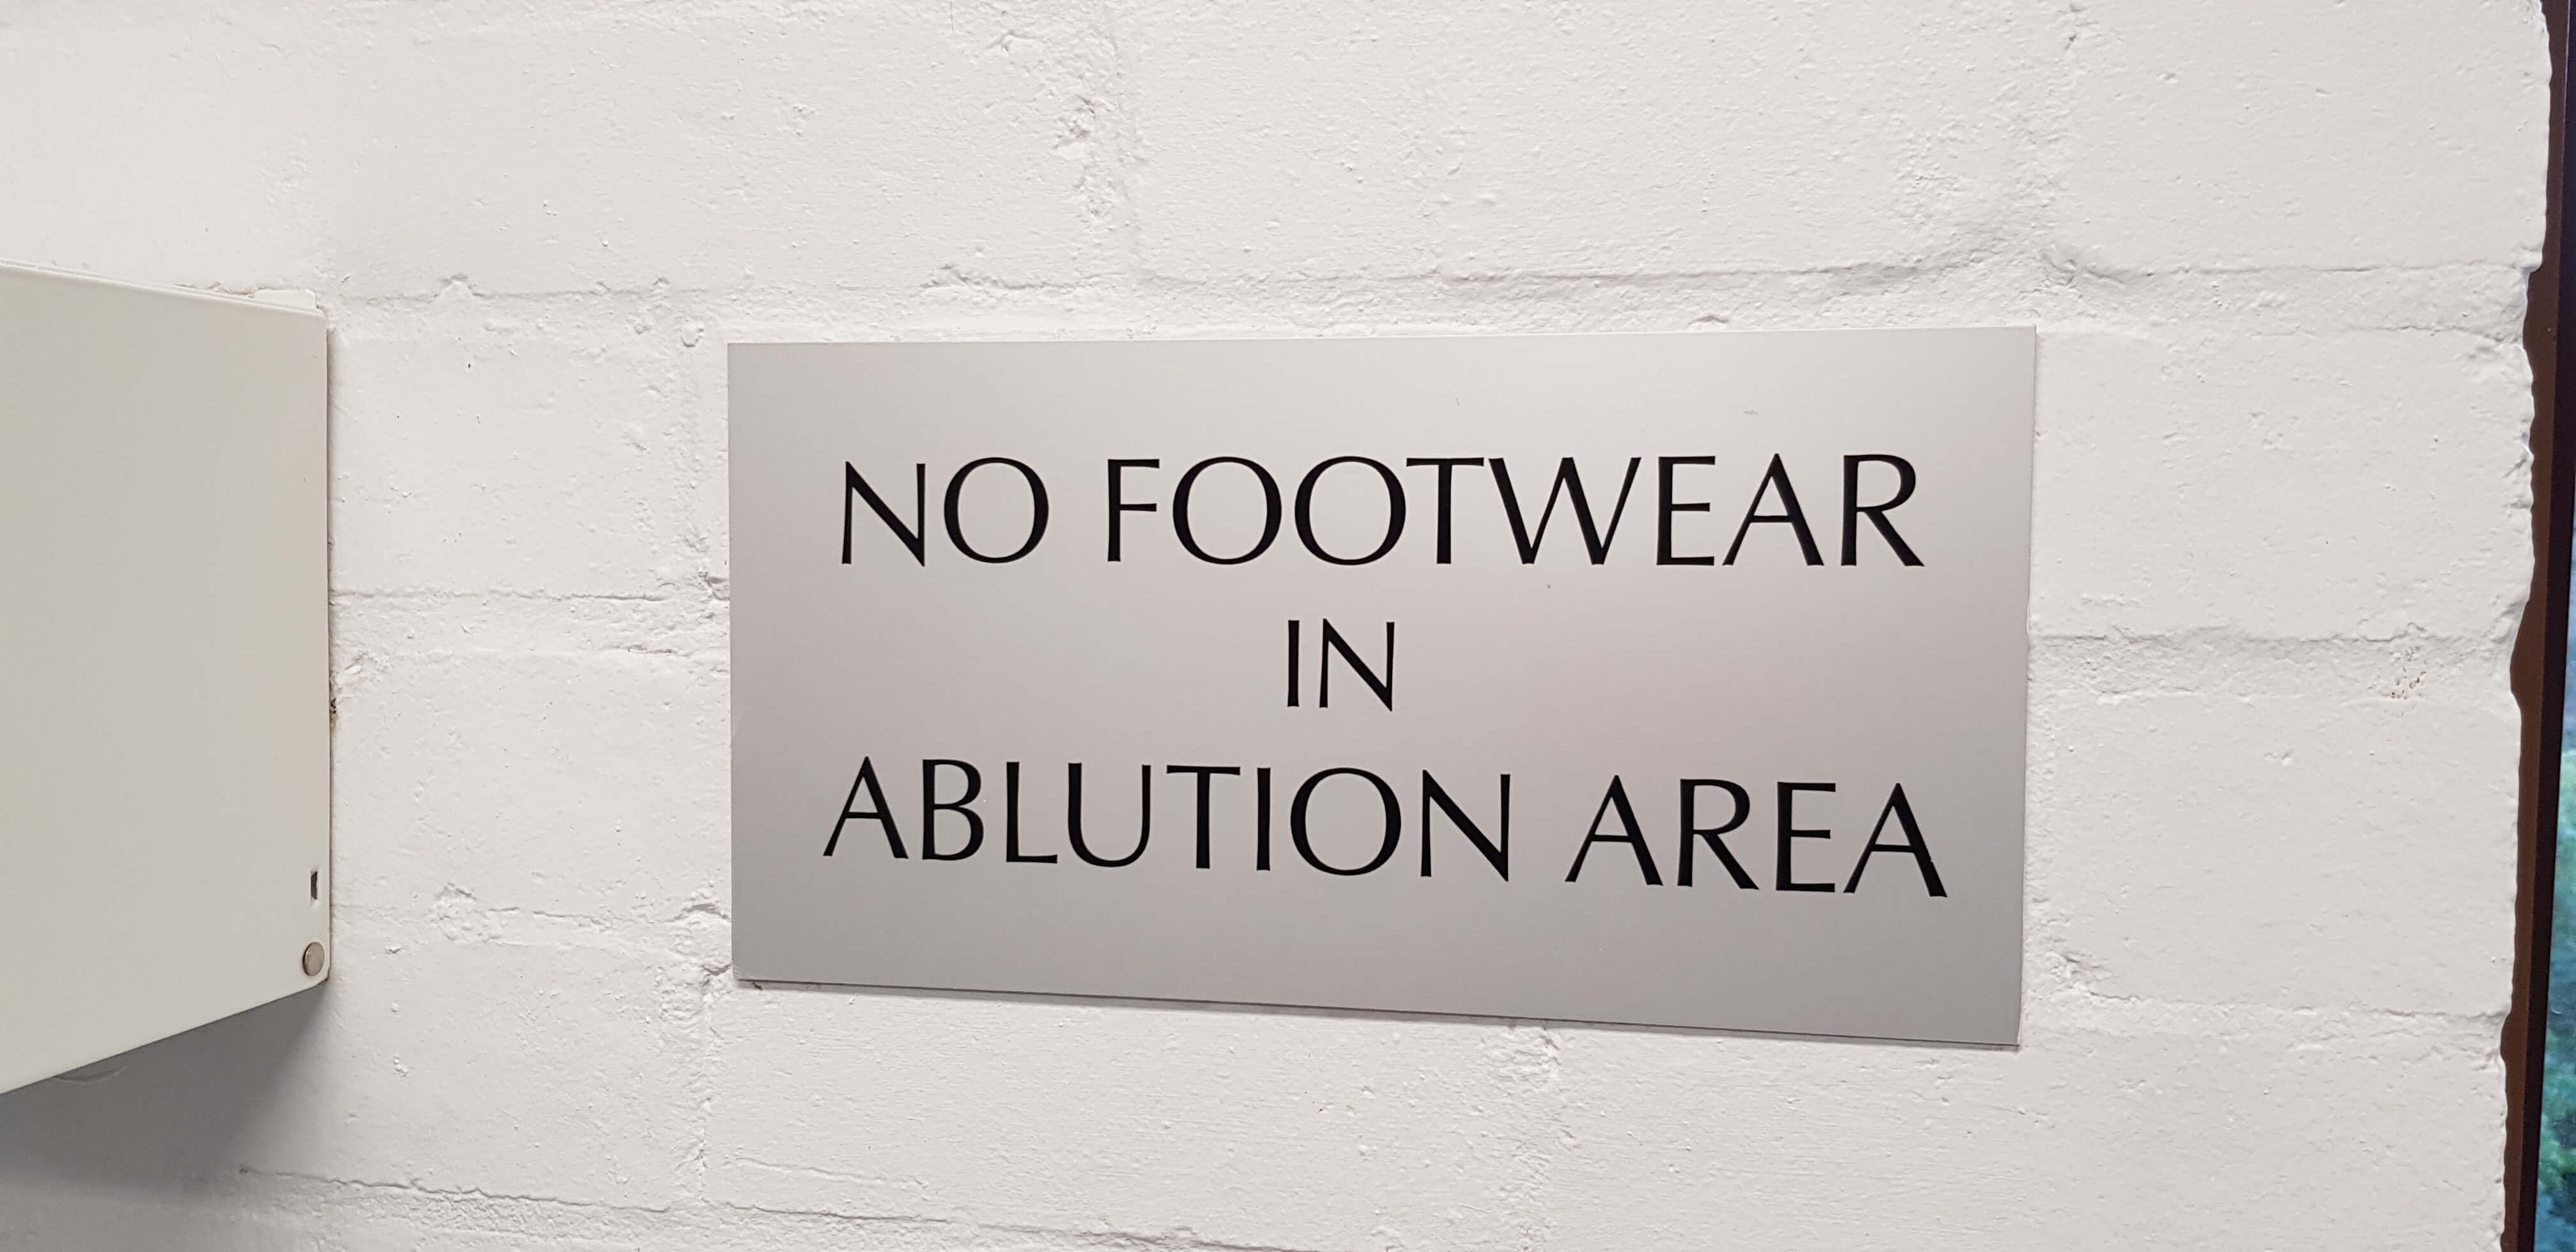 Brother's Wudu Area at ISOC UNSW - No footwear in the ablution area sign